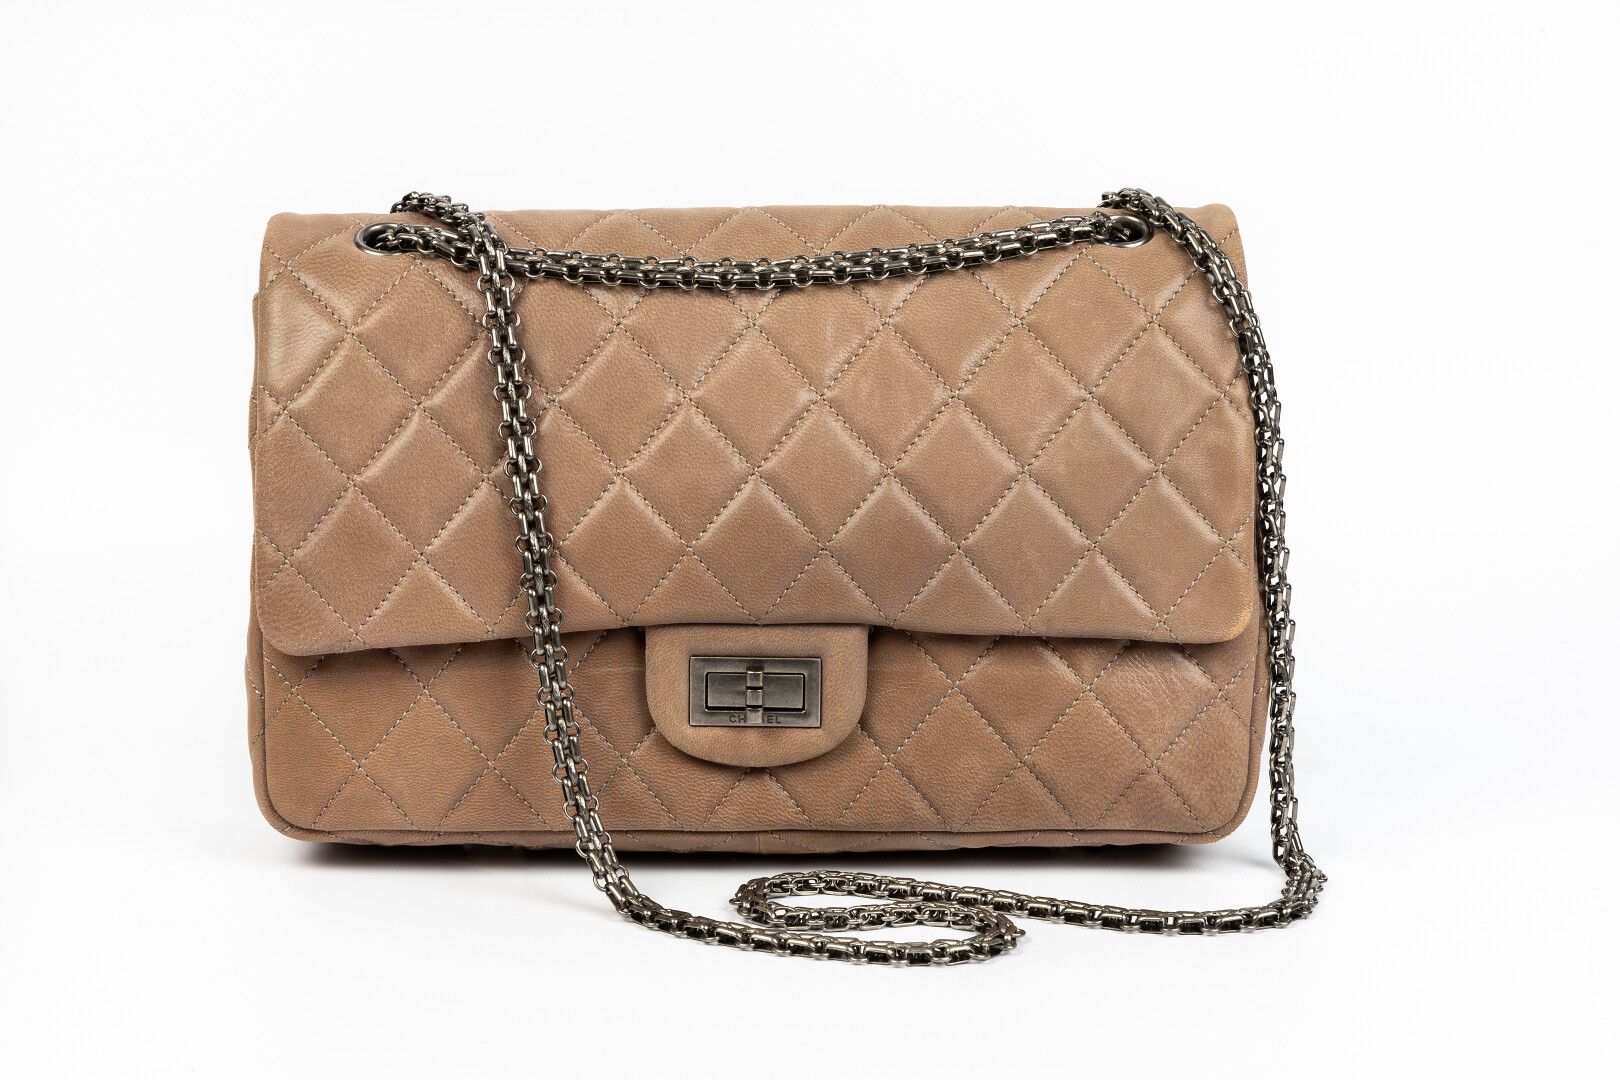 CHANEL. Large 2.55 bag in quilted taupe aged calf leath…